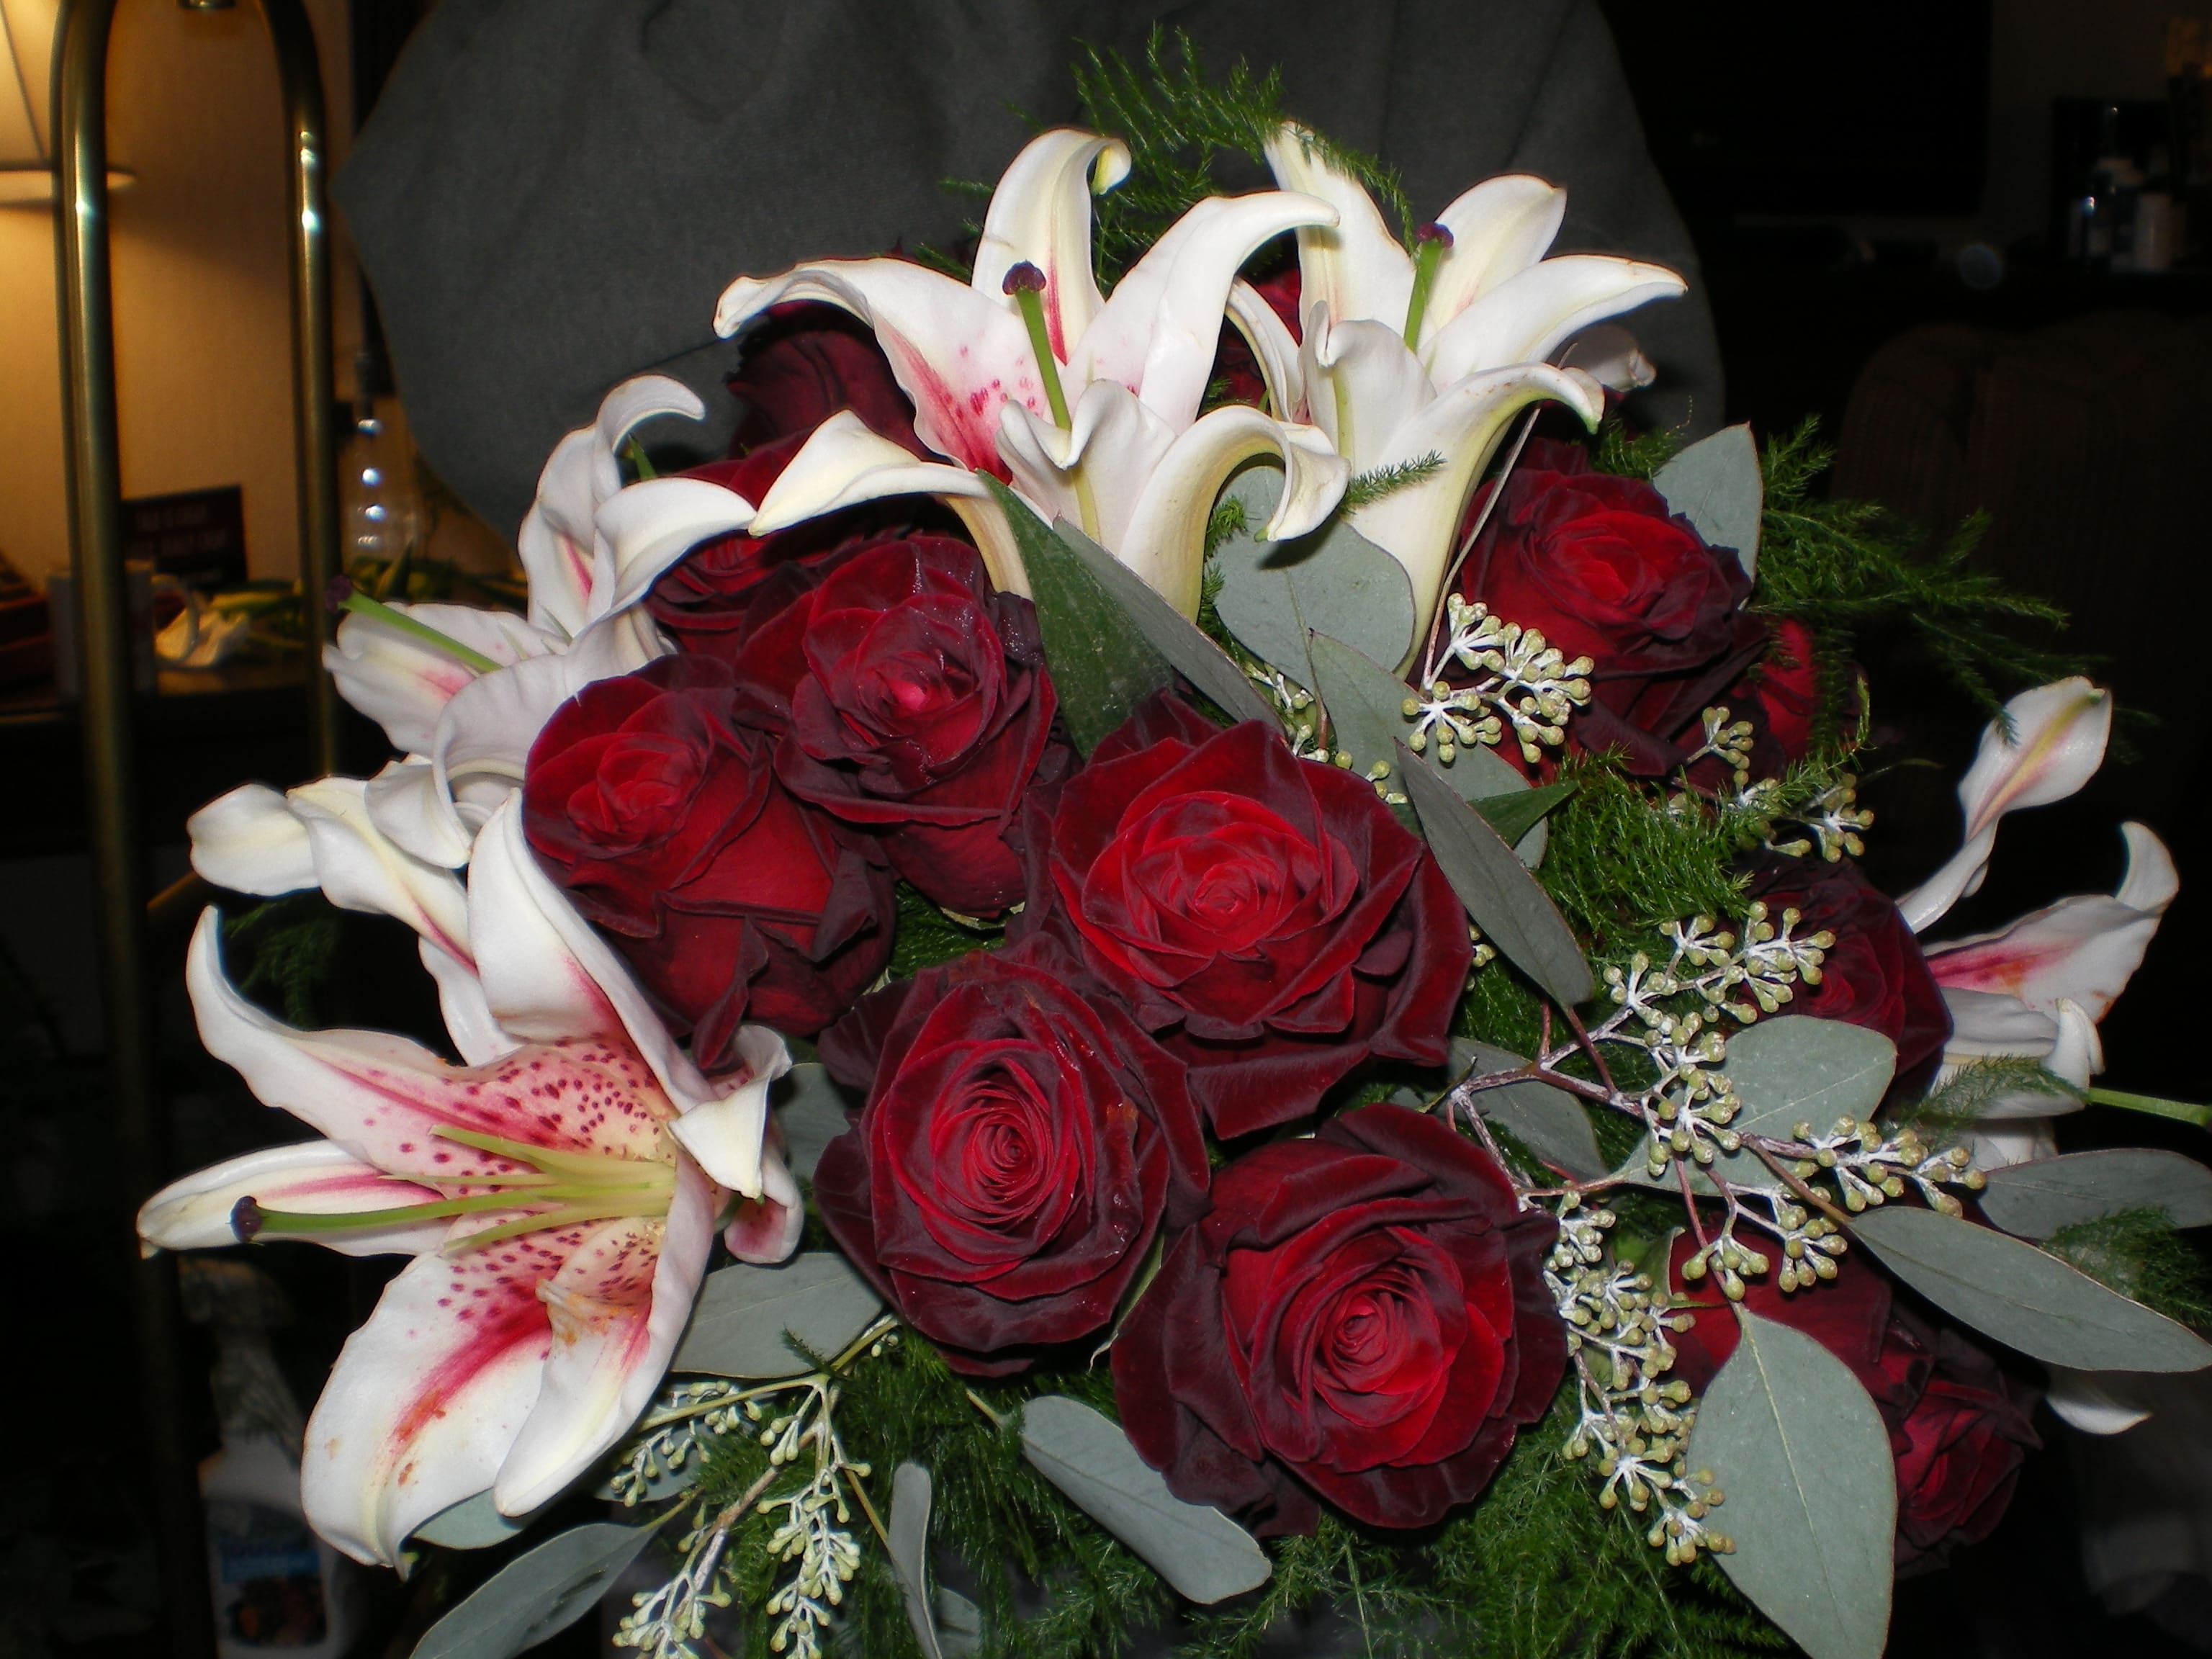 Elegant Evening Wedding Bouquet - black baccara roses and stargazer lilies with textural greenery